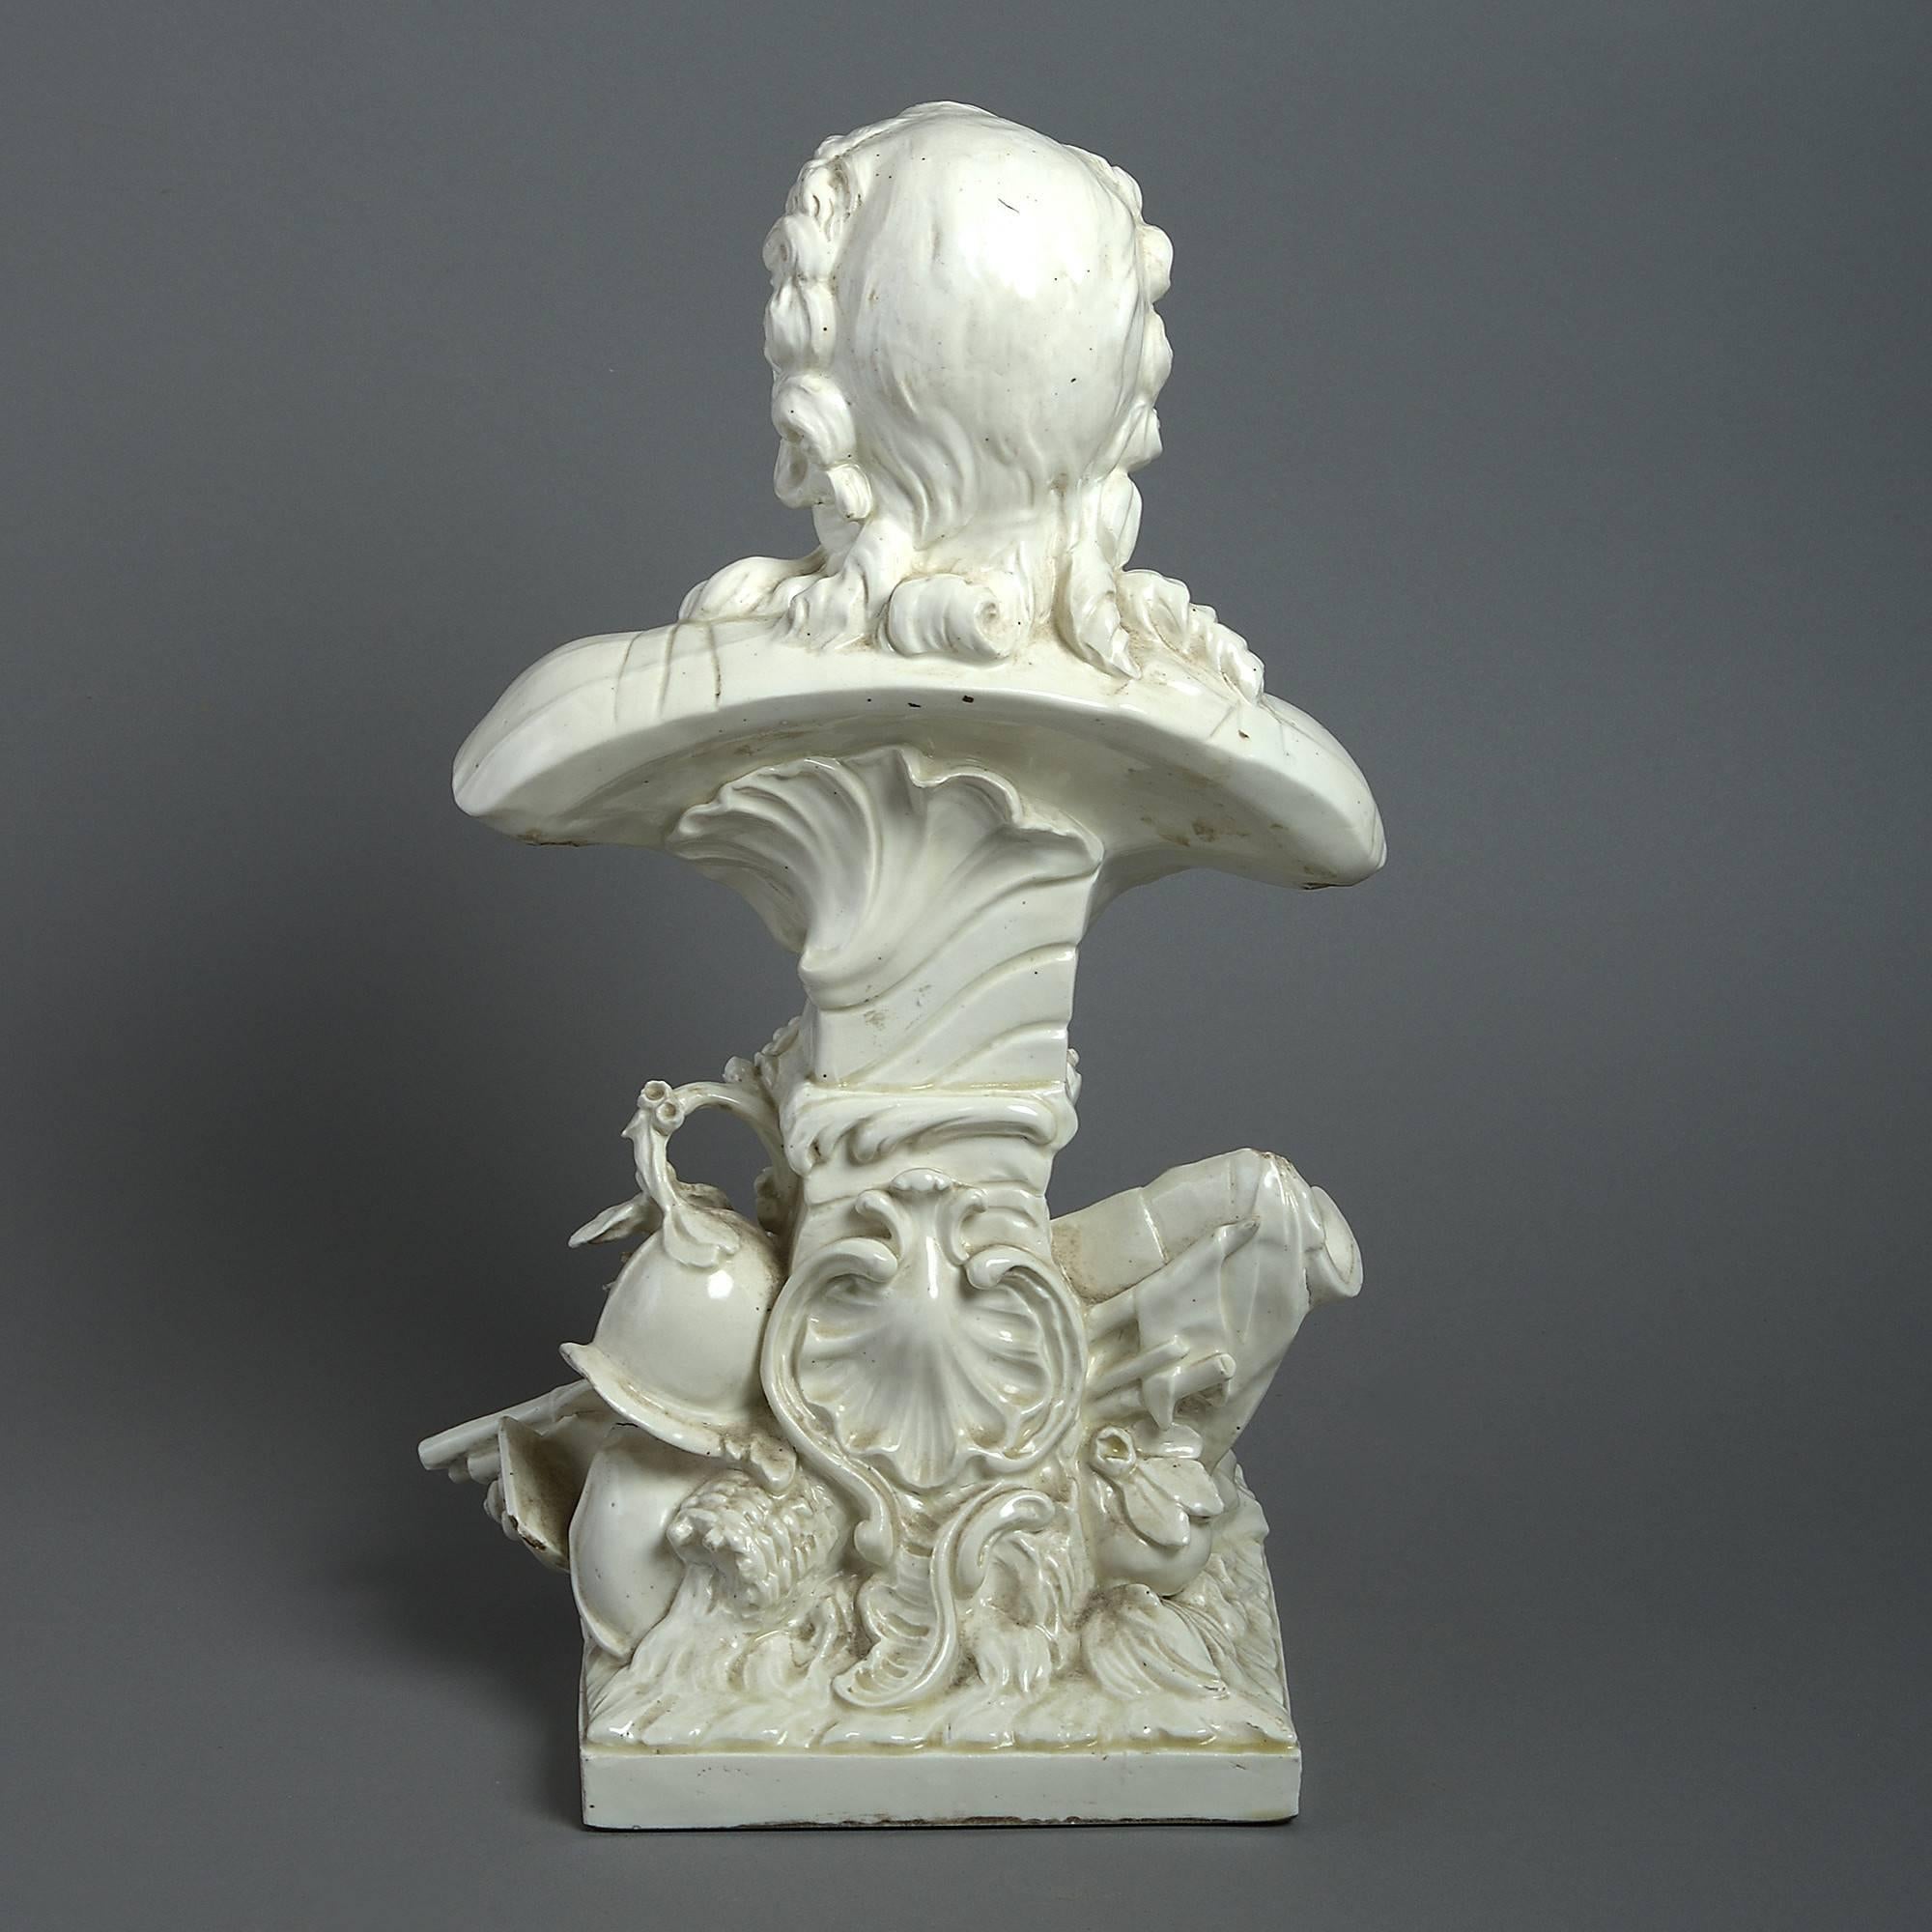 A rare early 19th century creamware bust of good scale, depicting King Louis XV of France, set upon a shaped Rocaille socle, mounted with trophies of war.

Louis XV, known as Louis the beloved (Louis le bien aimé), reigned as King of France from